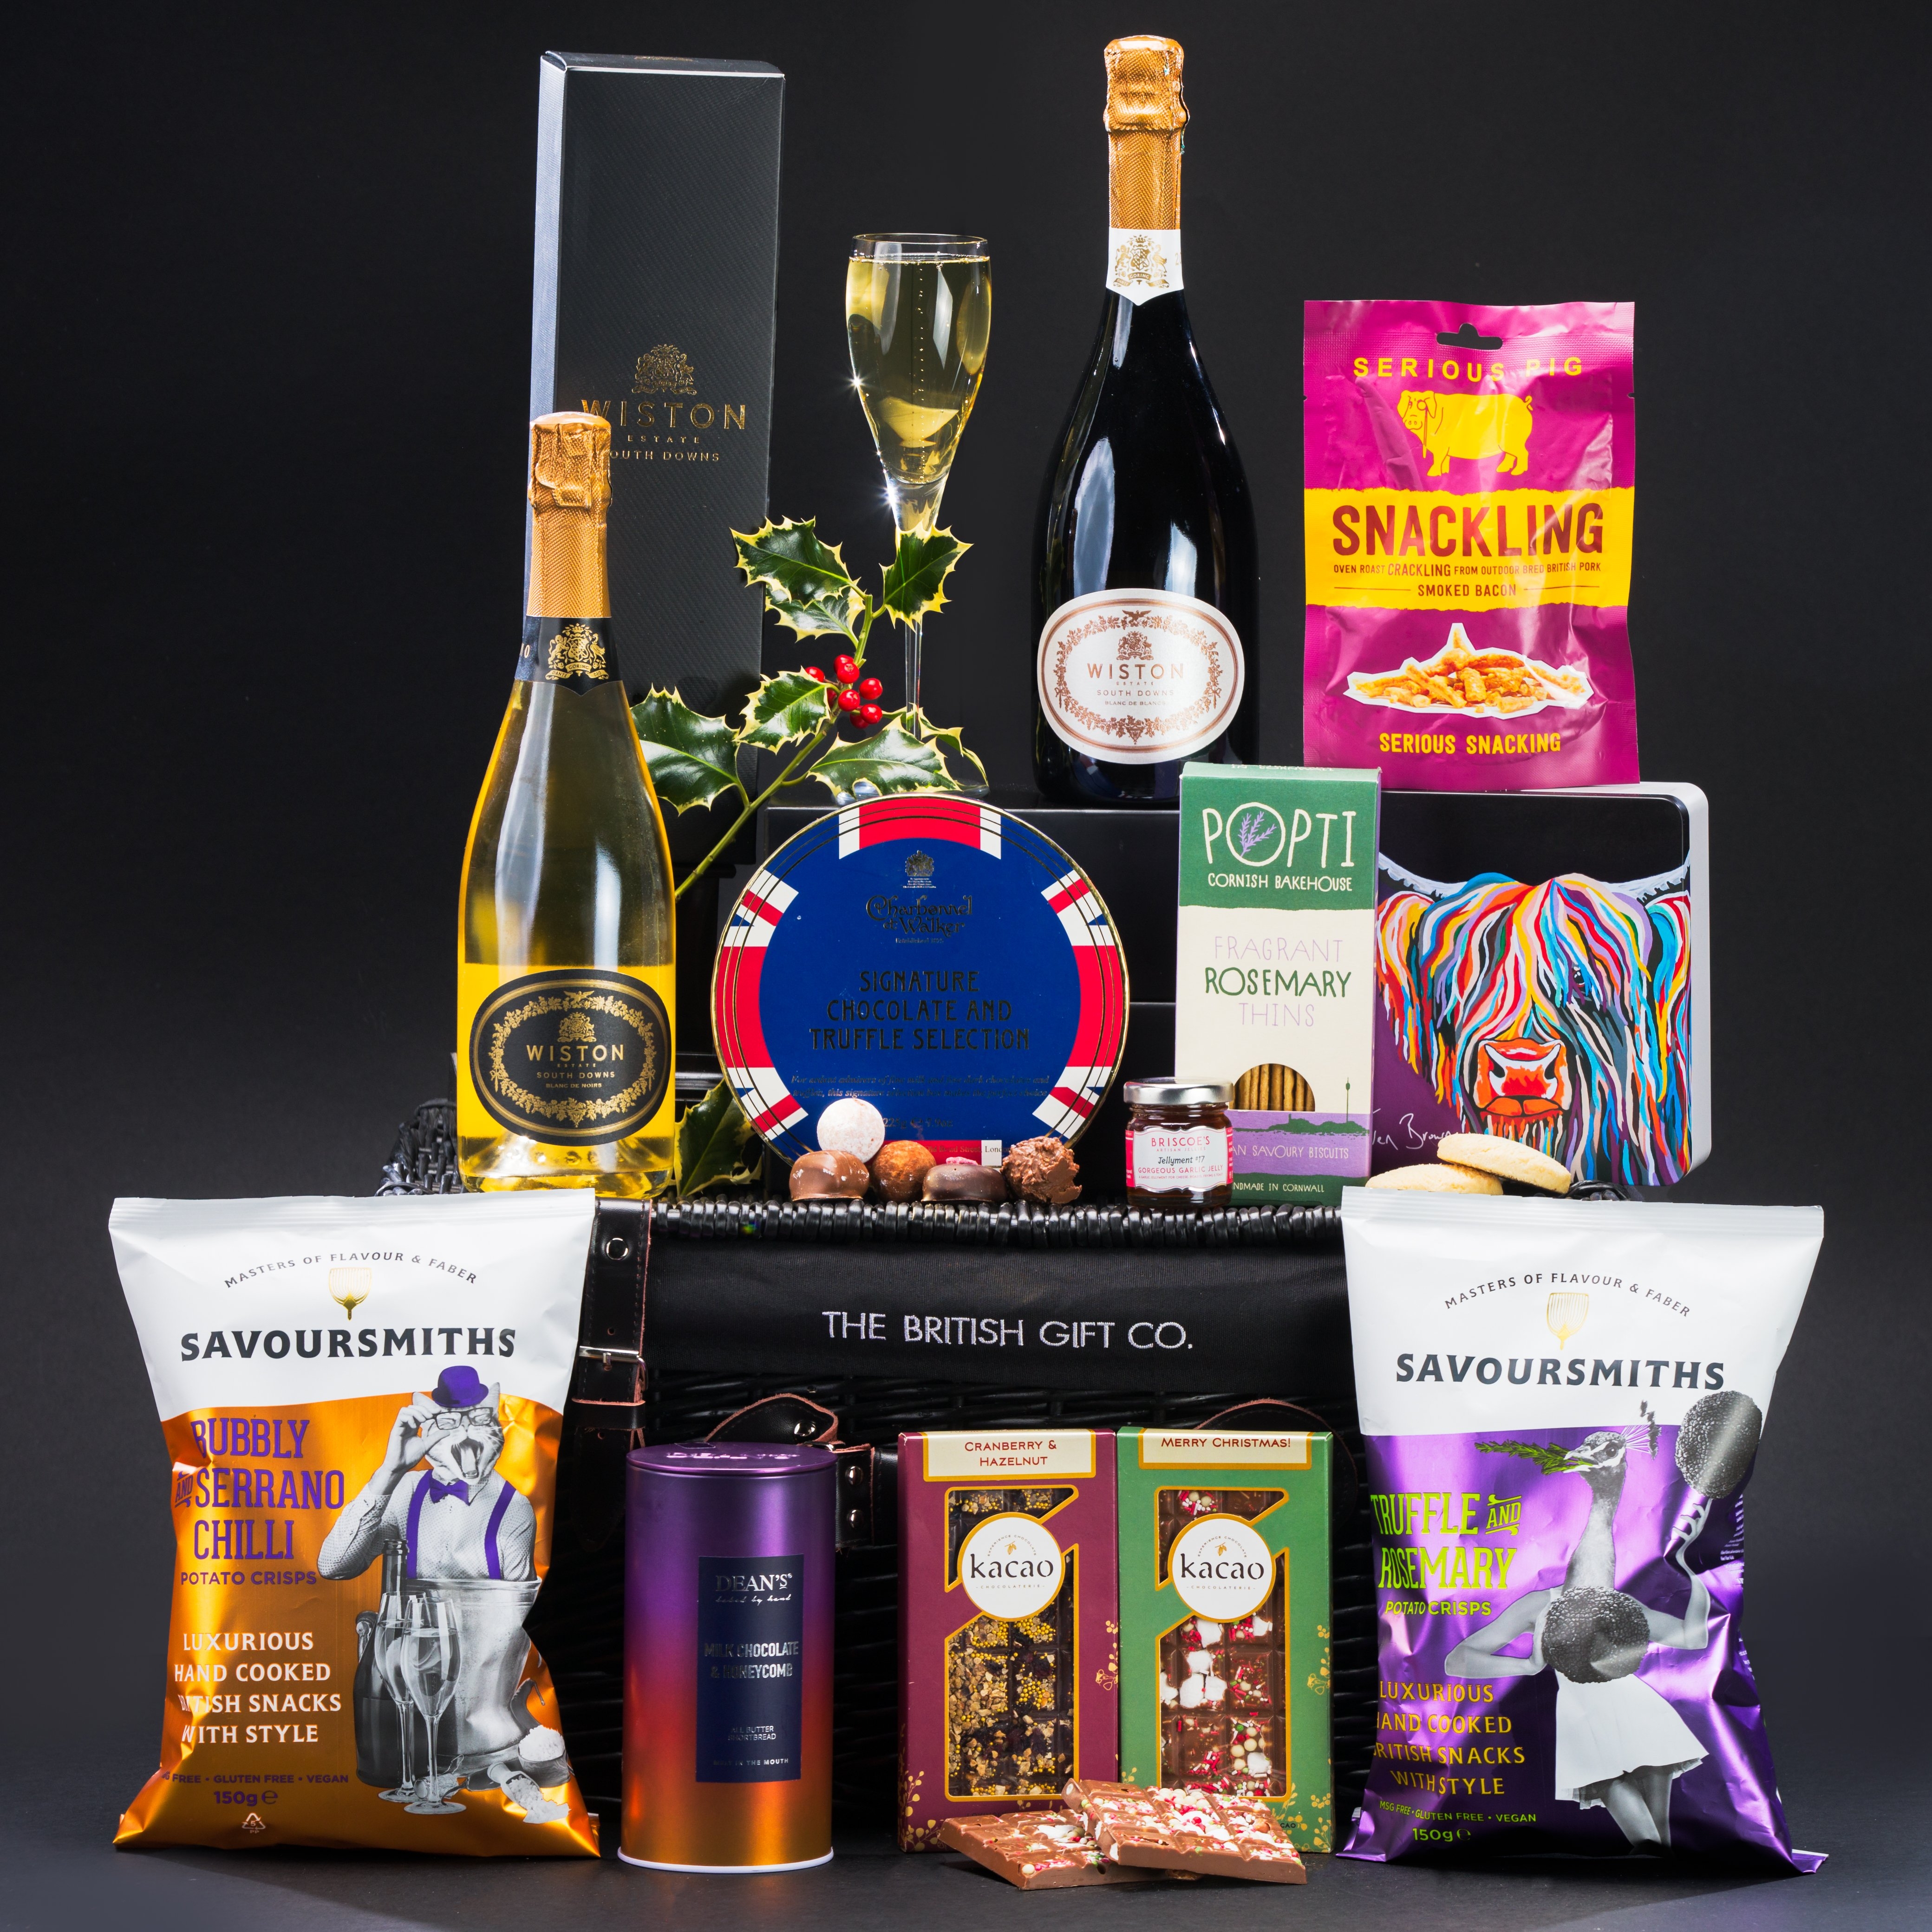 Luxury Christmas Hamper with Sparkling Wine | Christmas Gifts UK 2020 – The British Gift Co.